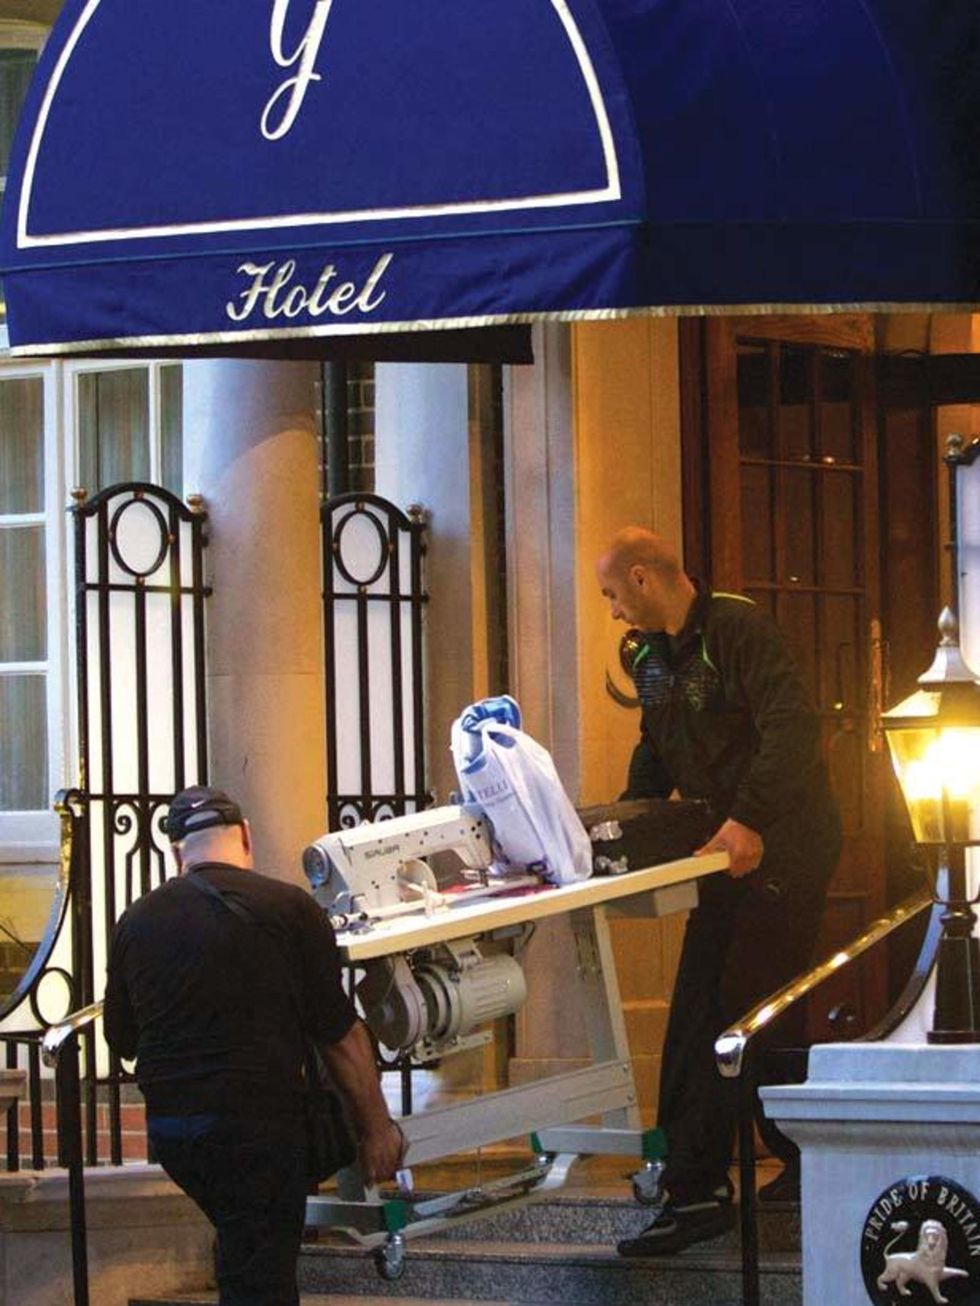 <p>A giant sewing machine is delivered to The Goring hotel for last minute adjustments for <a href="http://www.elleuk.com/starstyle/style-files/(section)/kate-middleton">Kate Middleton</a> &amp; <a href="http://www.elleuk.com/news/Star-style-News/the-roya